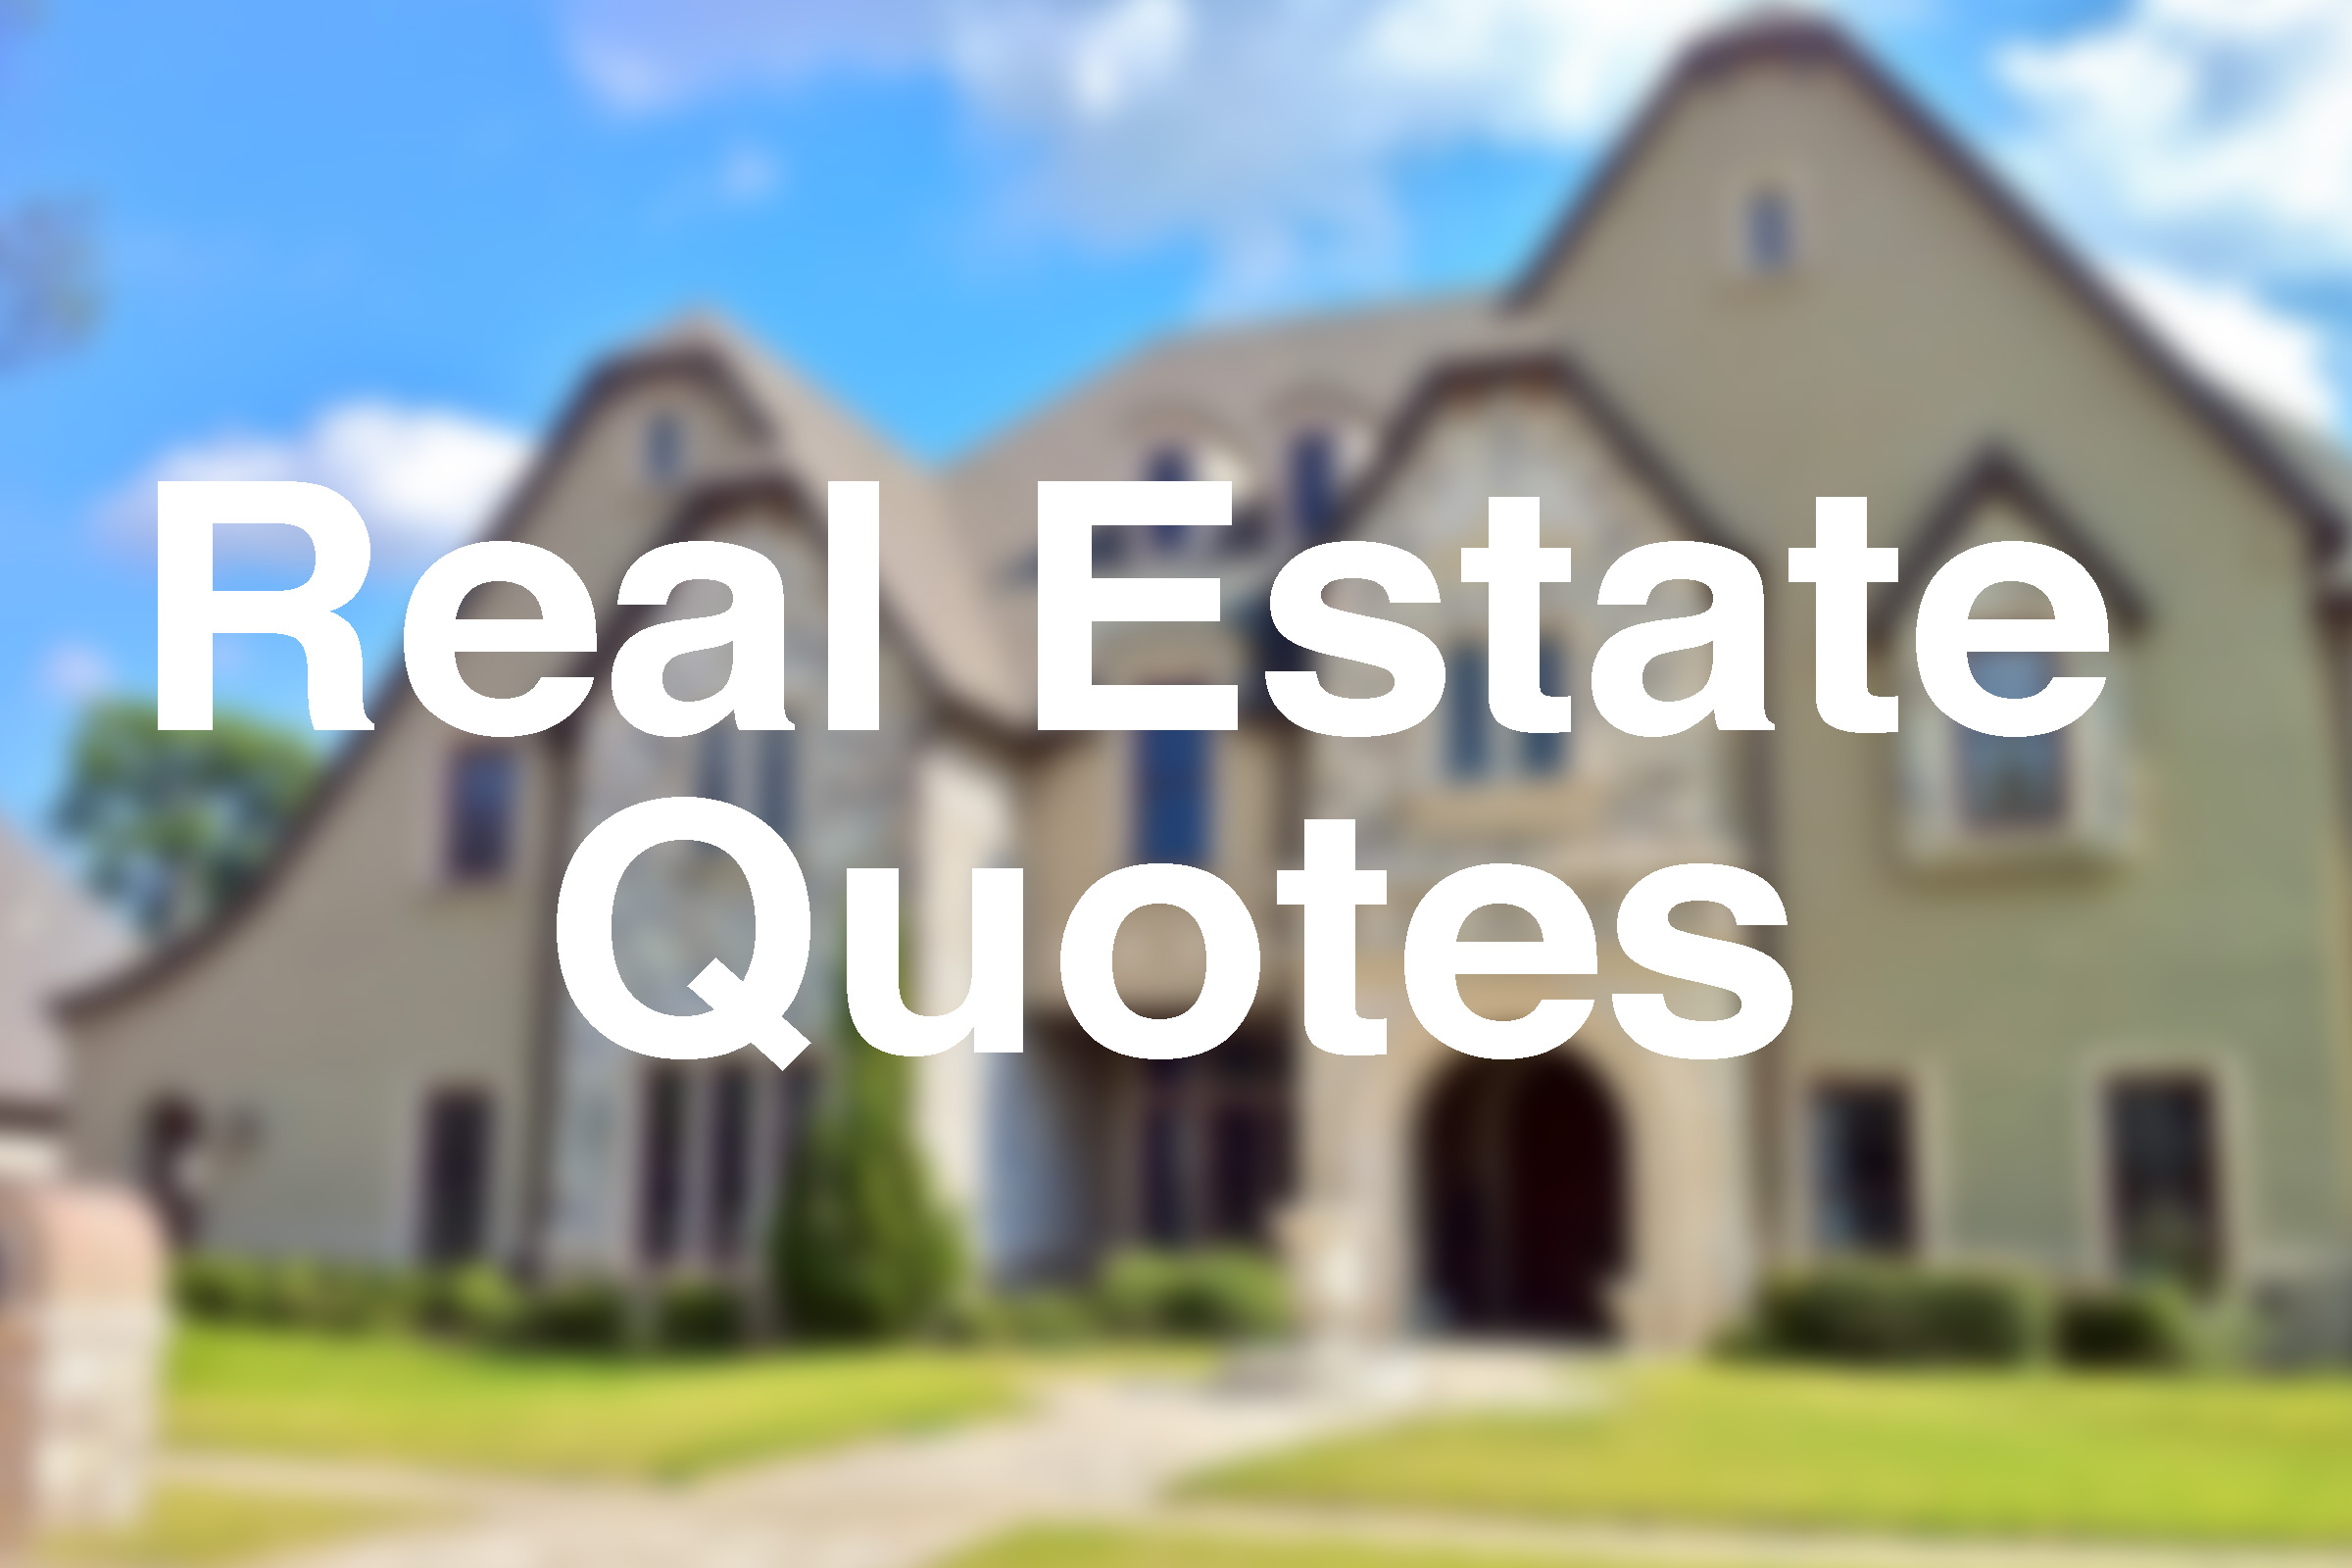 1987887445-real-estate-quotes-featured.jpg